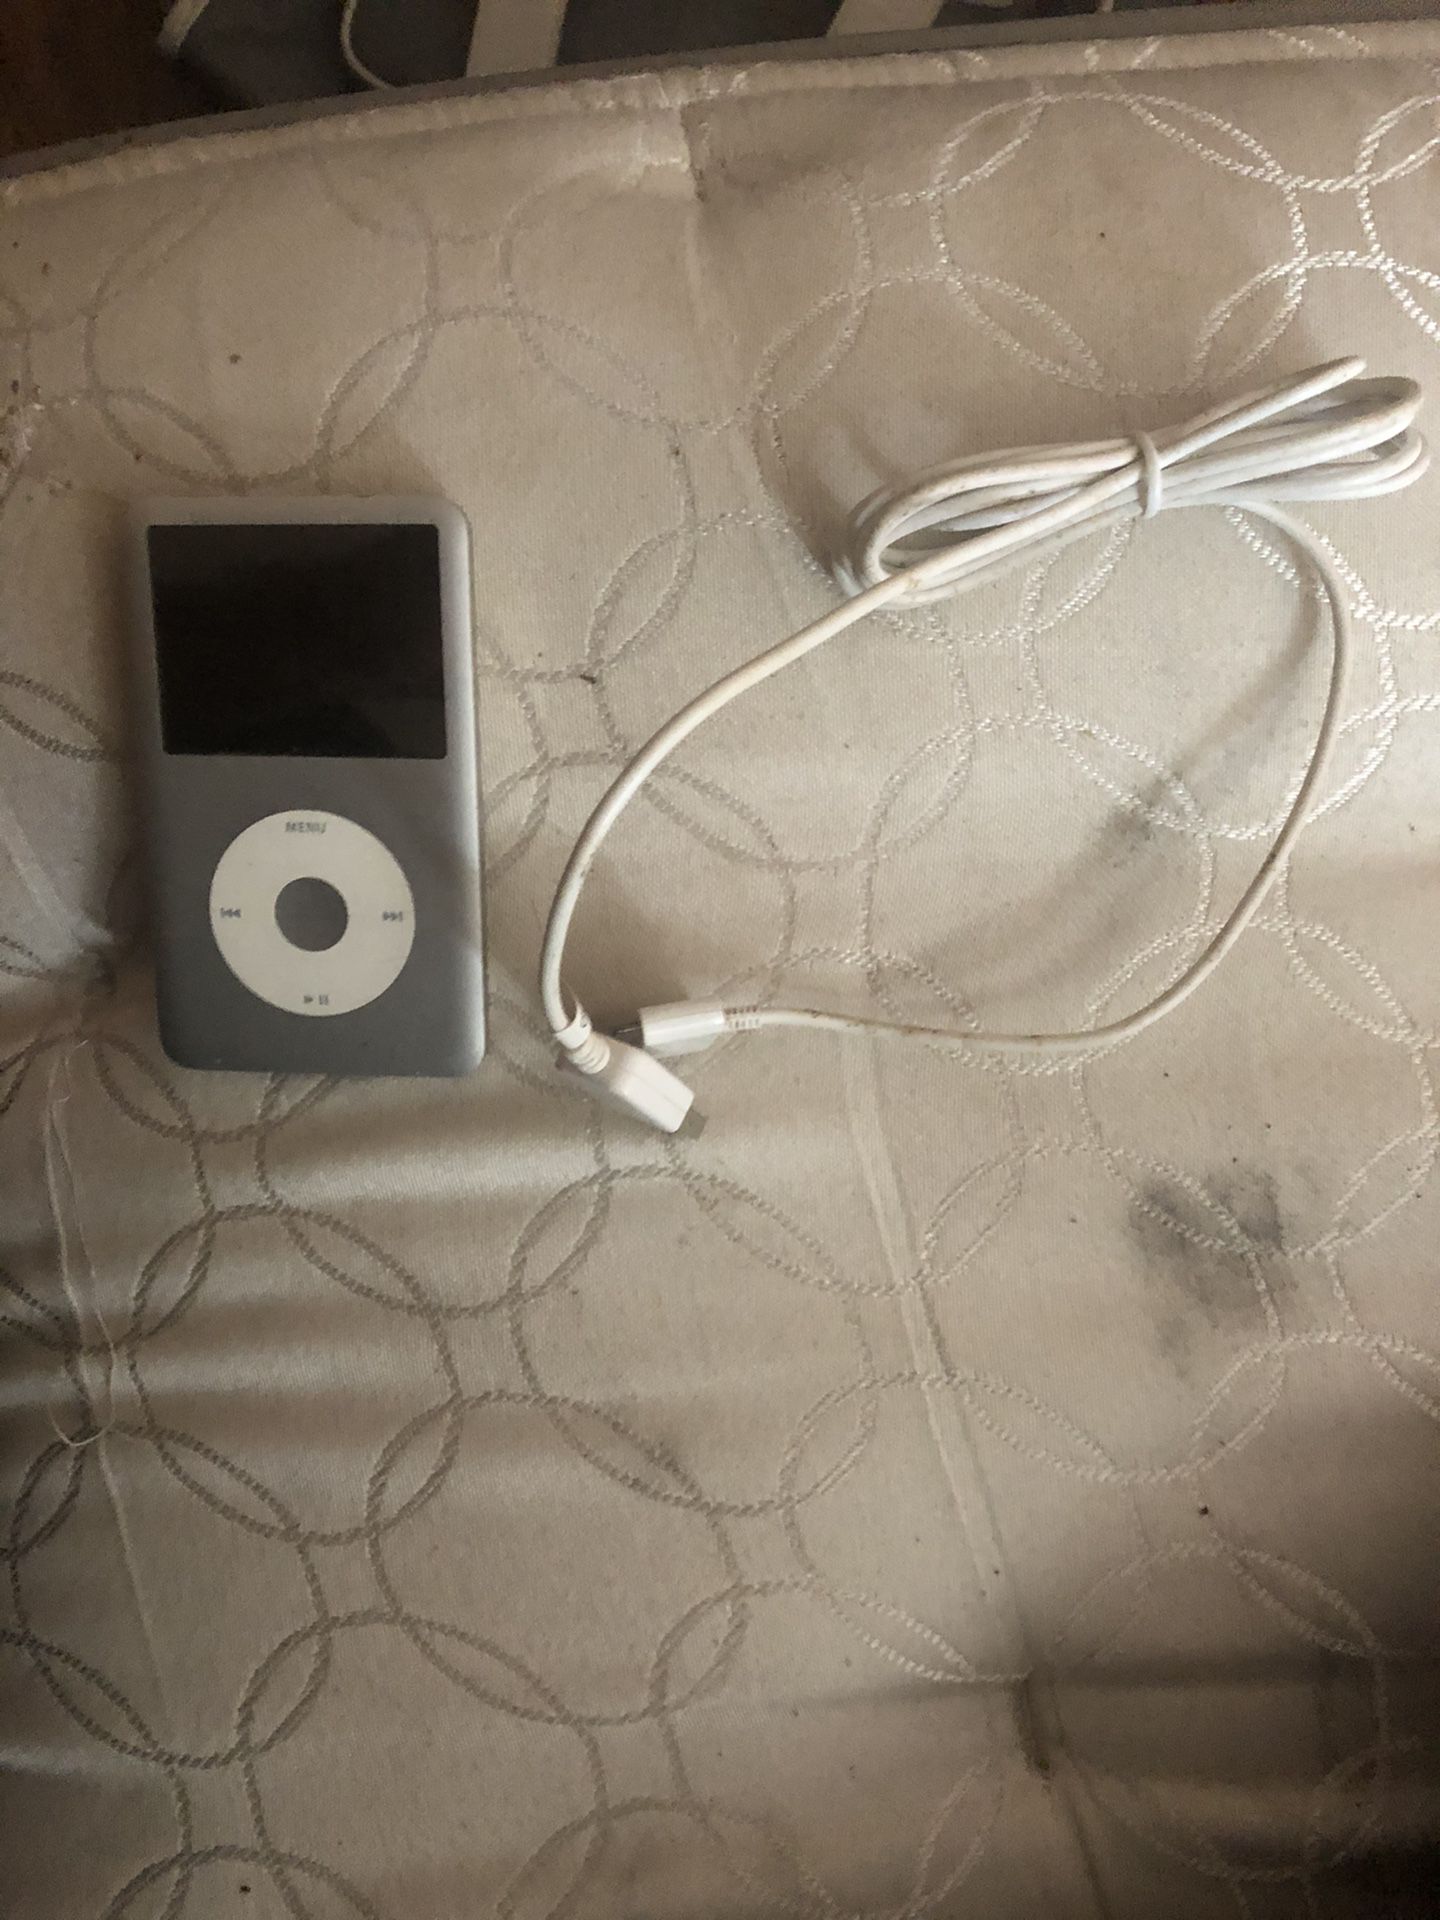 iPod 120GB with charger